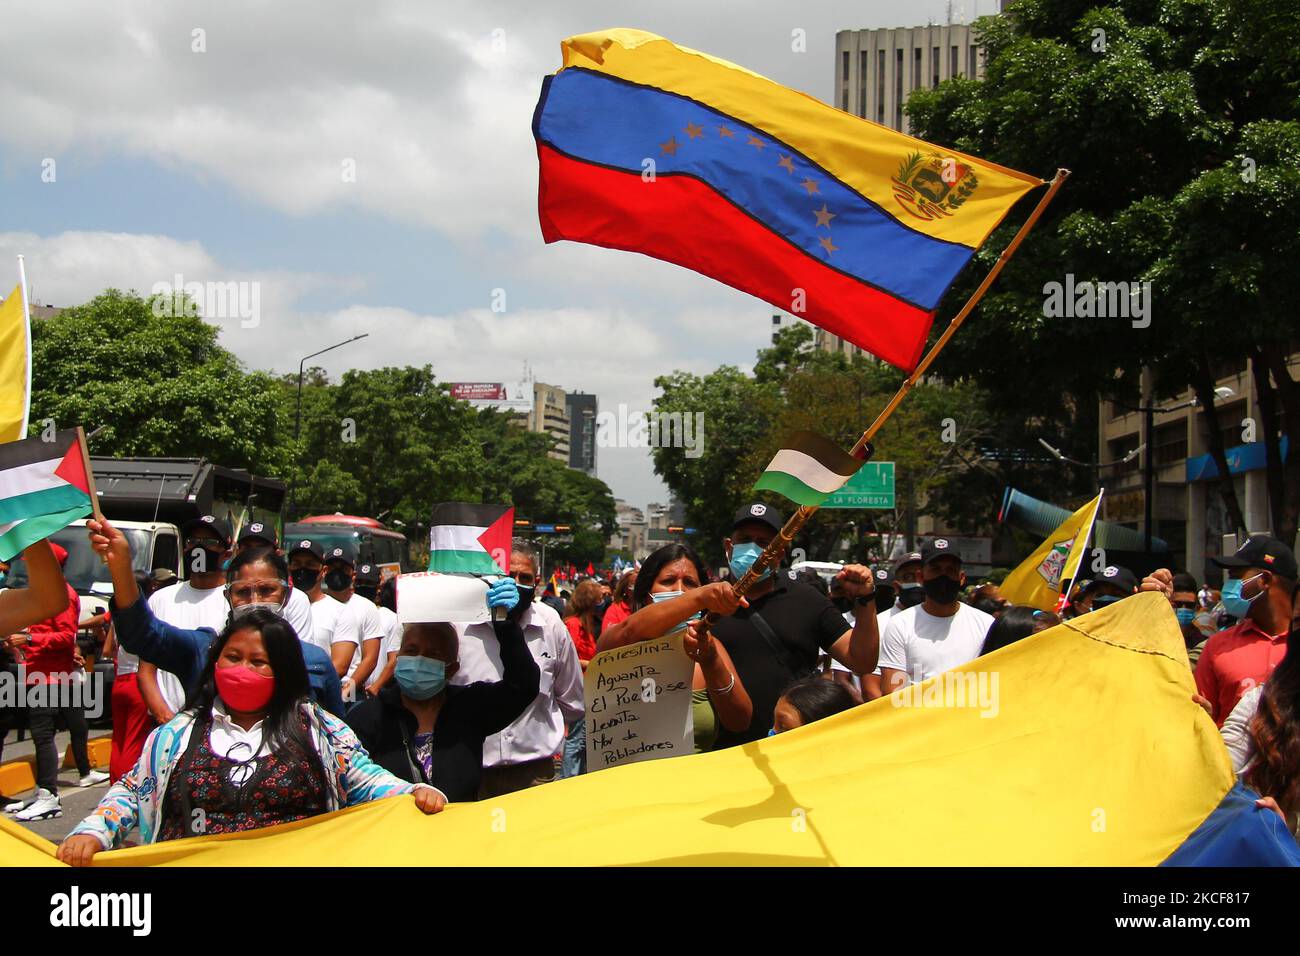 A woman waves a Venezuelan flag during a march in solidarity with the Palestinian people over the armed conflict with the state of Israel, amid the Covid-19 pandemic, in Caracas, Venezuela on May 25, 2021. (Photo by Javier Campos/NurPhoto) Stock Photo